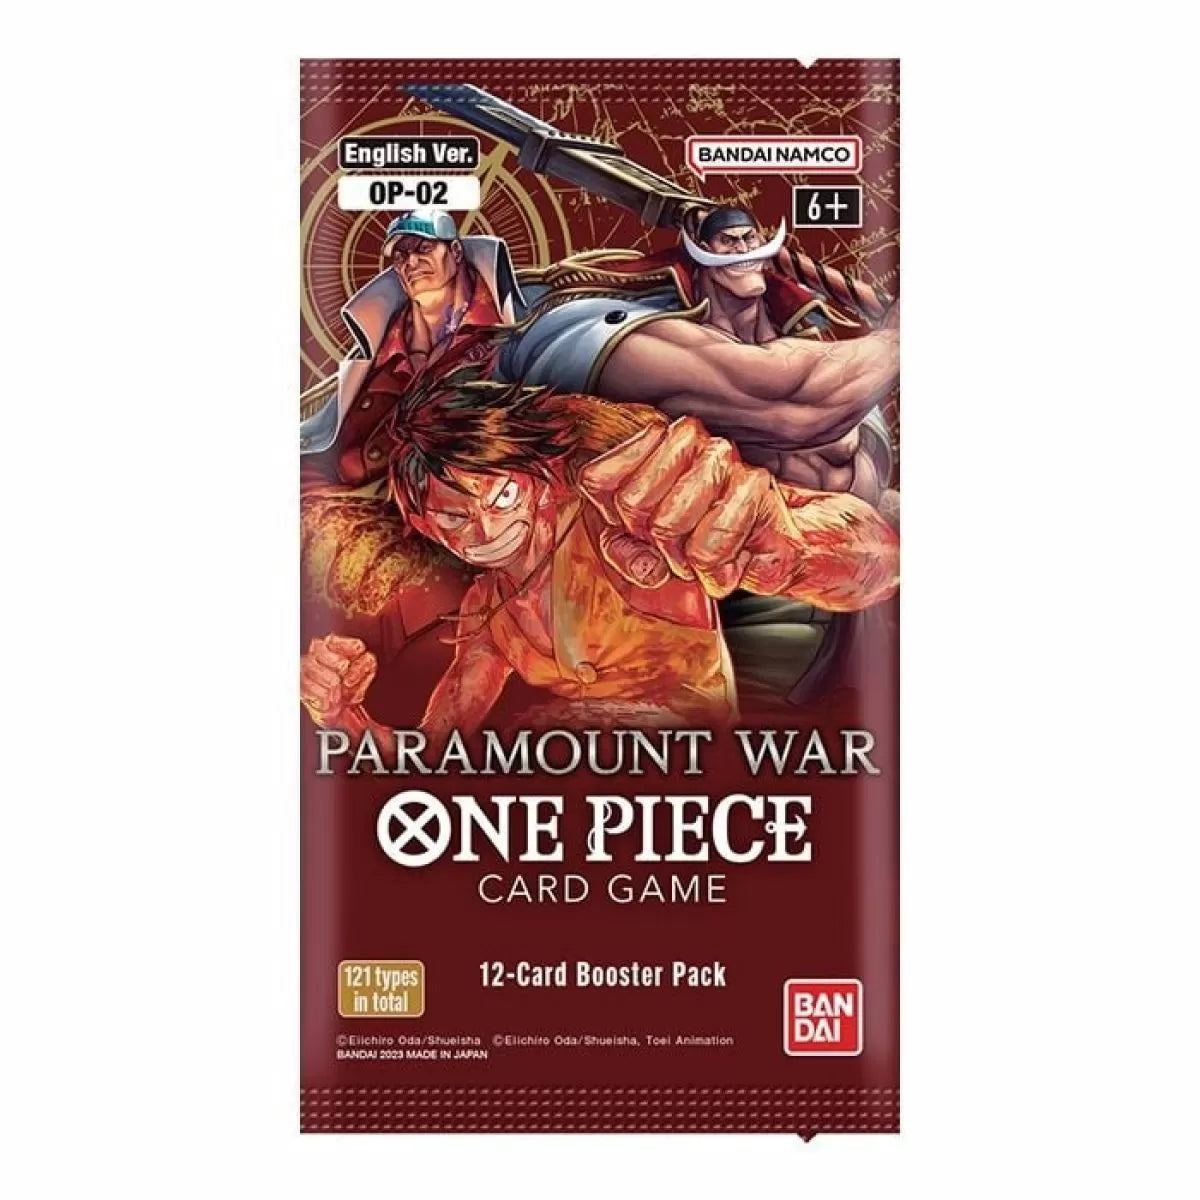 One Piece Card Game Paramount War - OP-02 Booster Pack